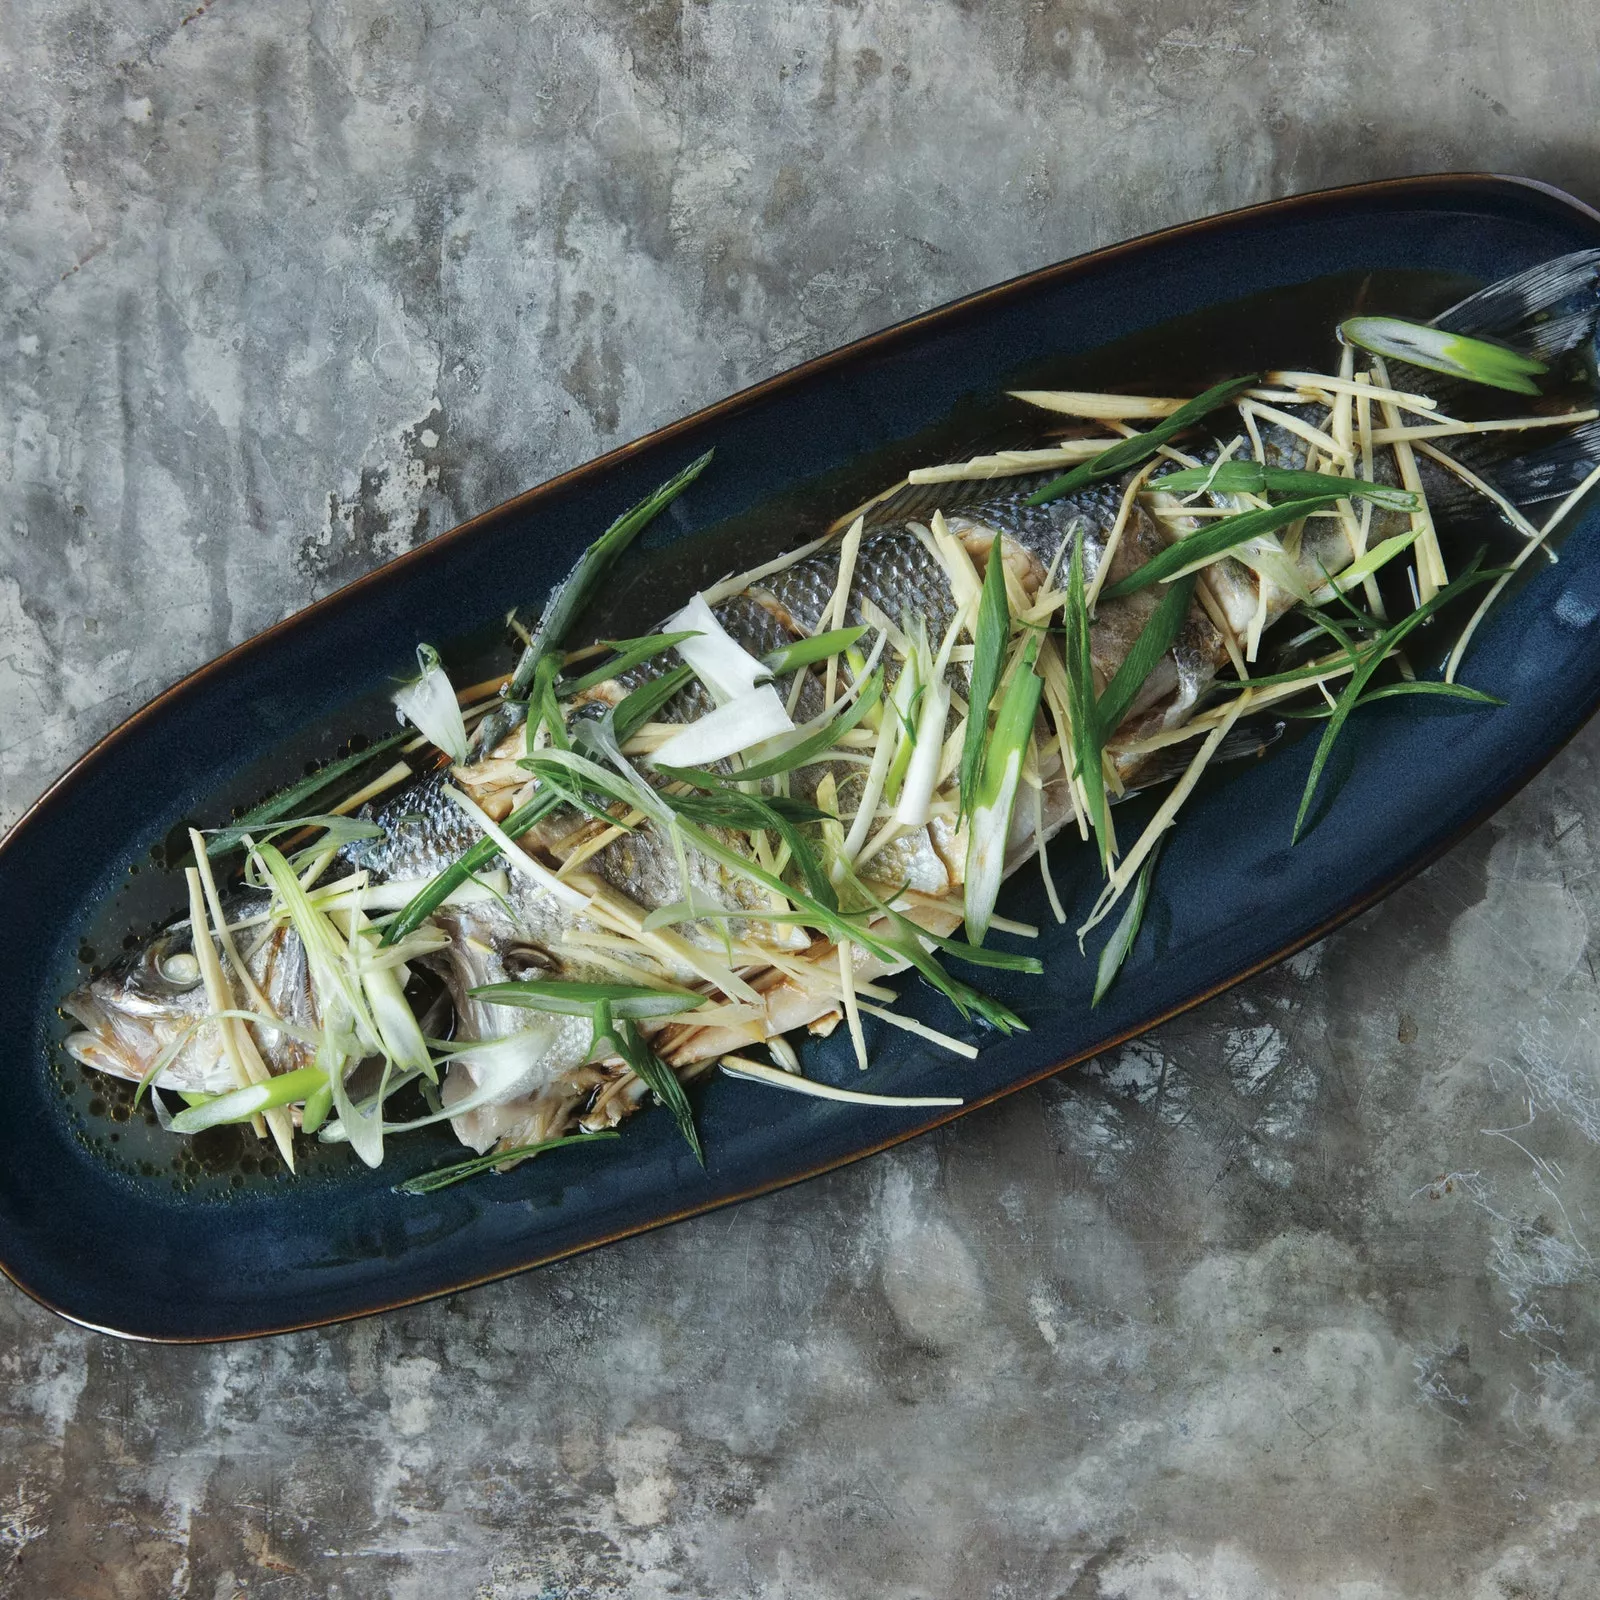 Steamed fish with ginger and green onions